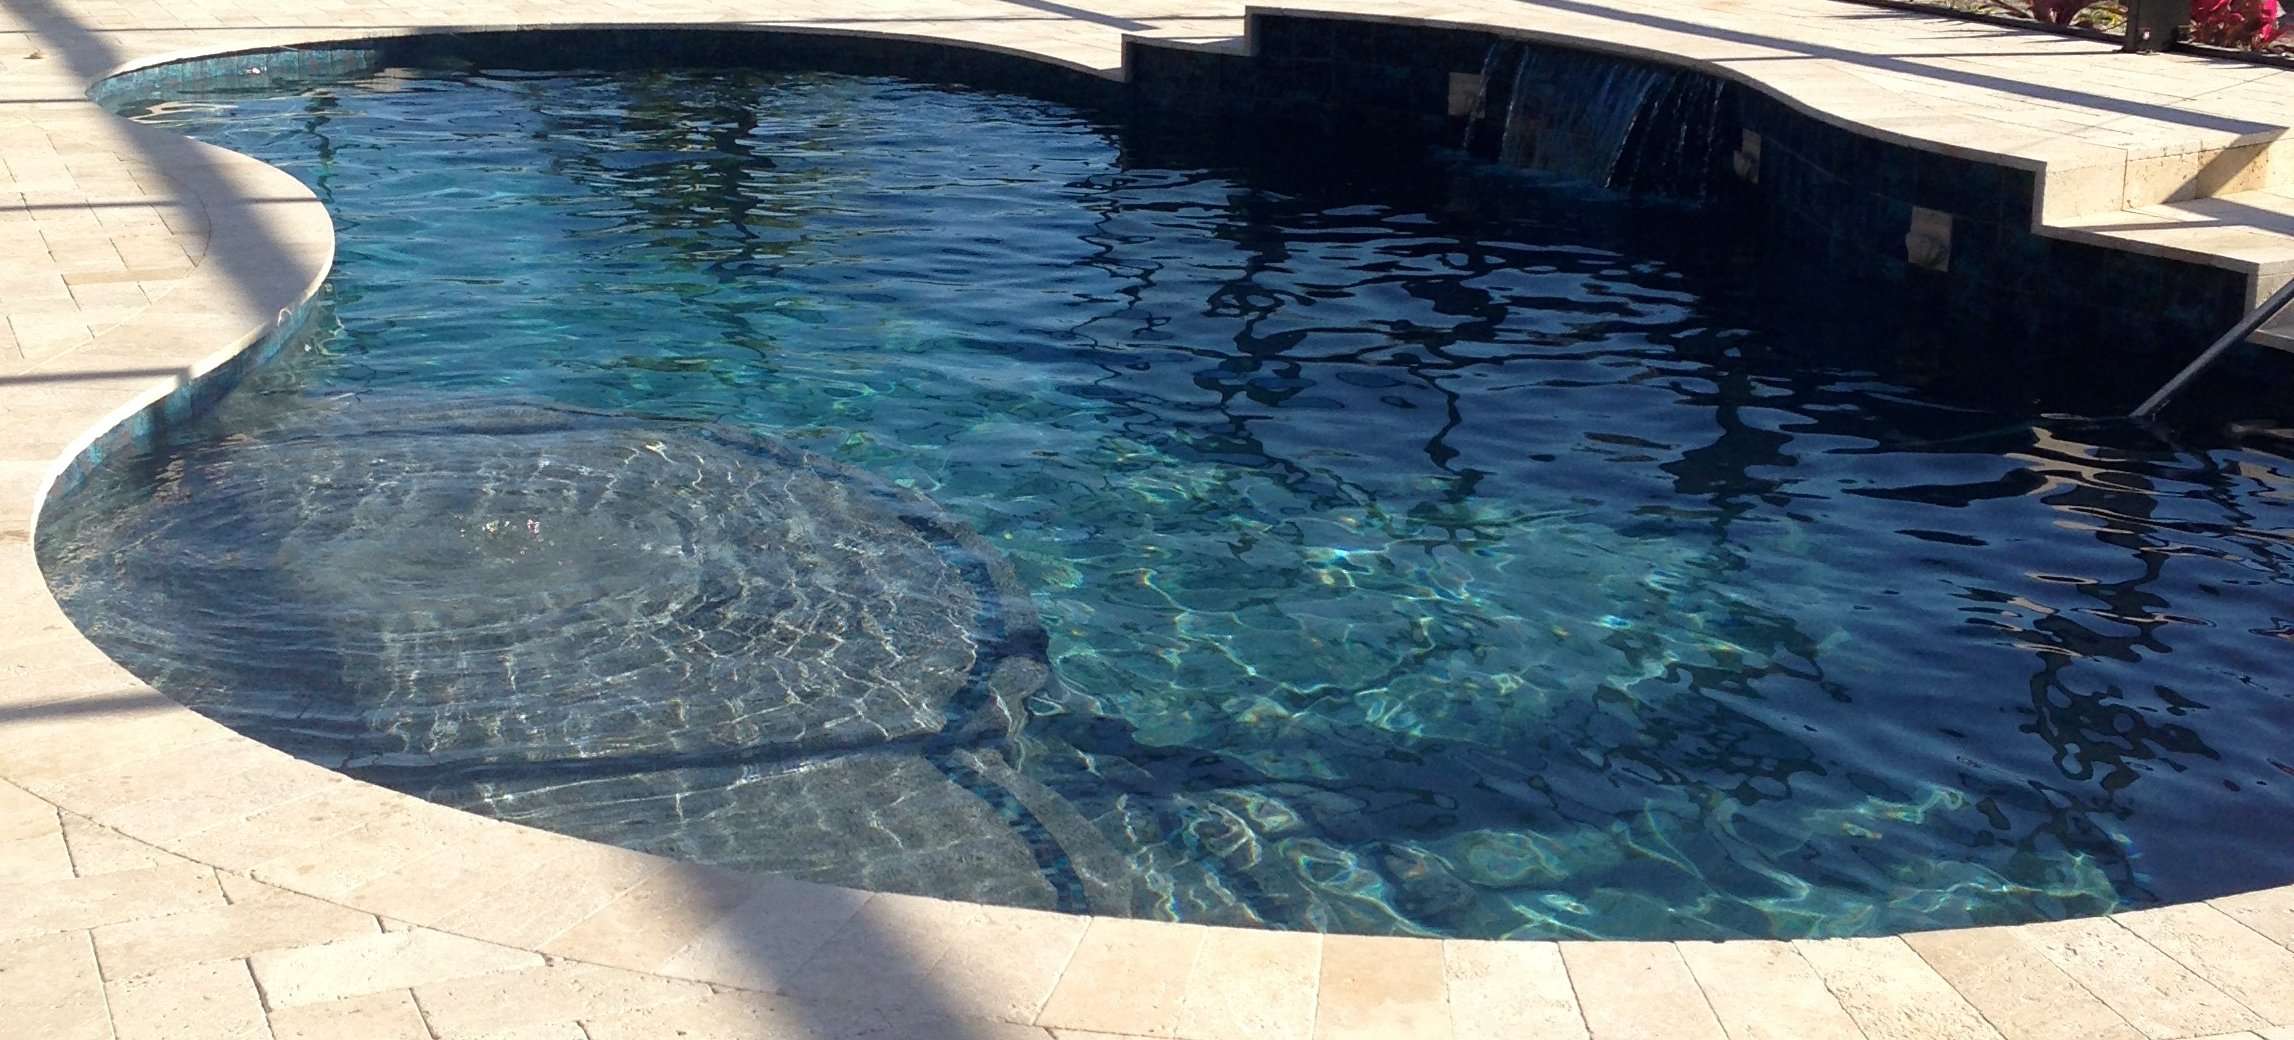 Do You Have Cloudy Pool Water?